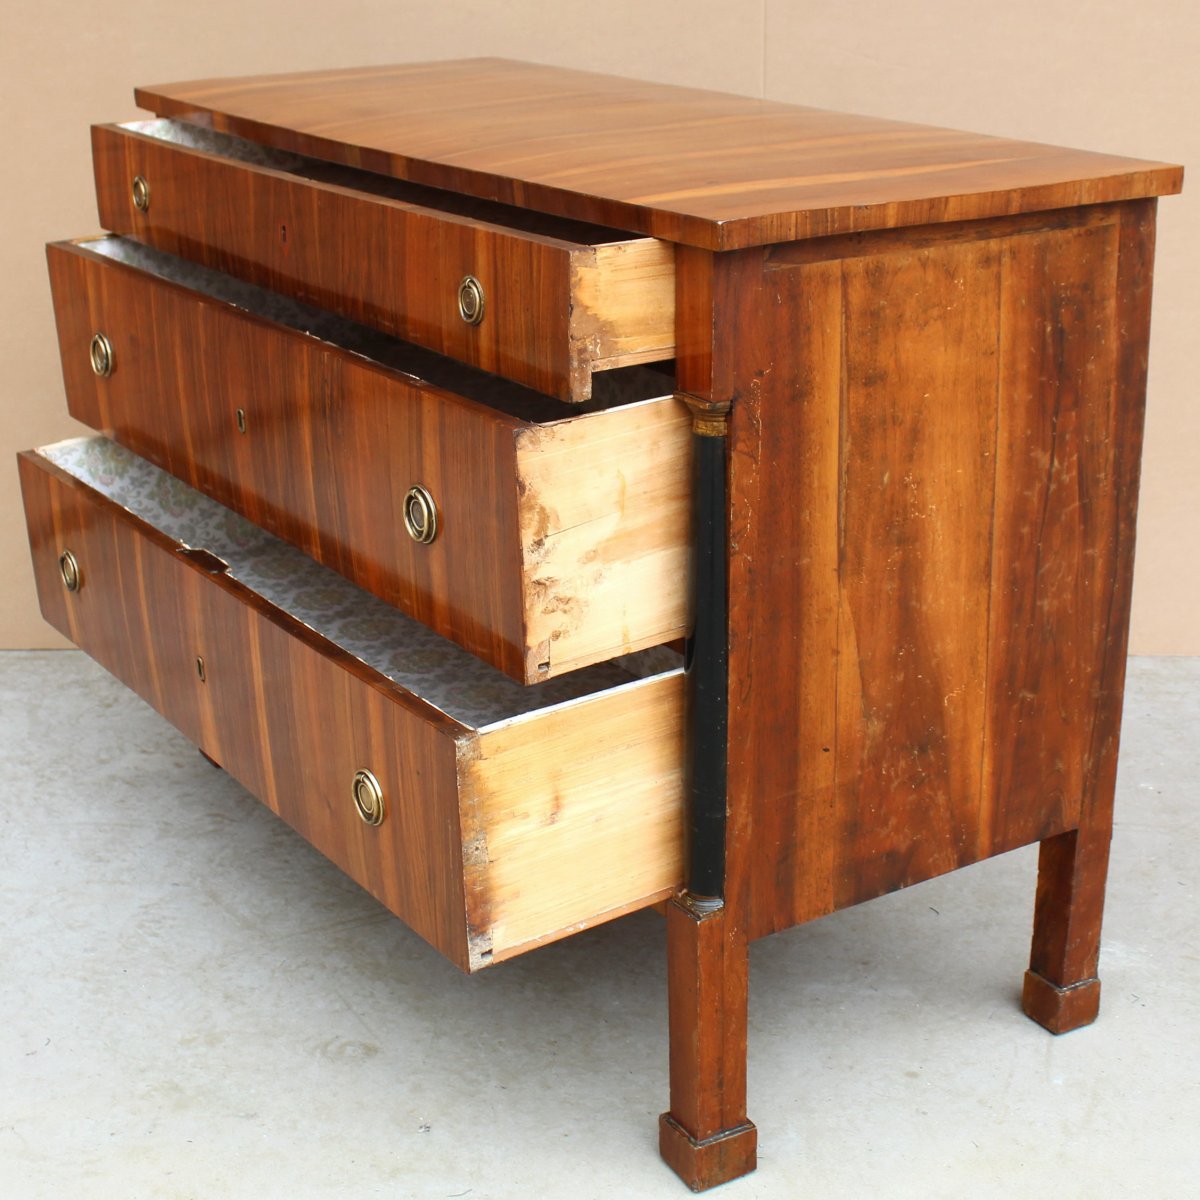 Antique Empire Dresser Commode Chest Of Drawers In Walnut - Italy 19th Century-photo-3